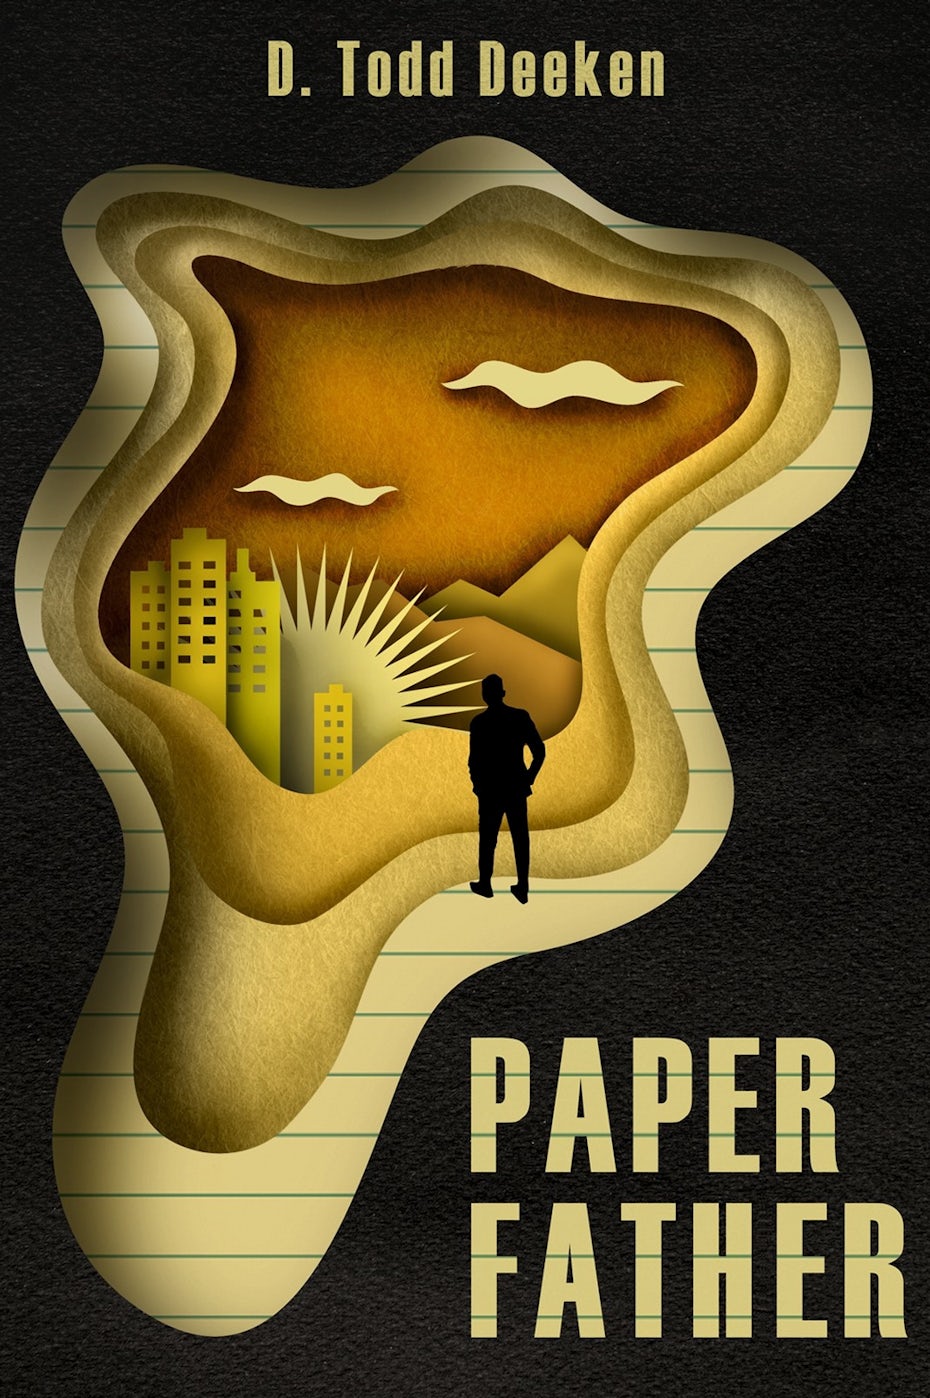 black book cover with yellow papercut image of a man looking into a landscape